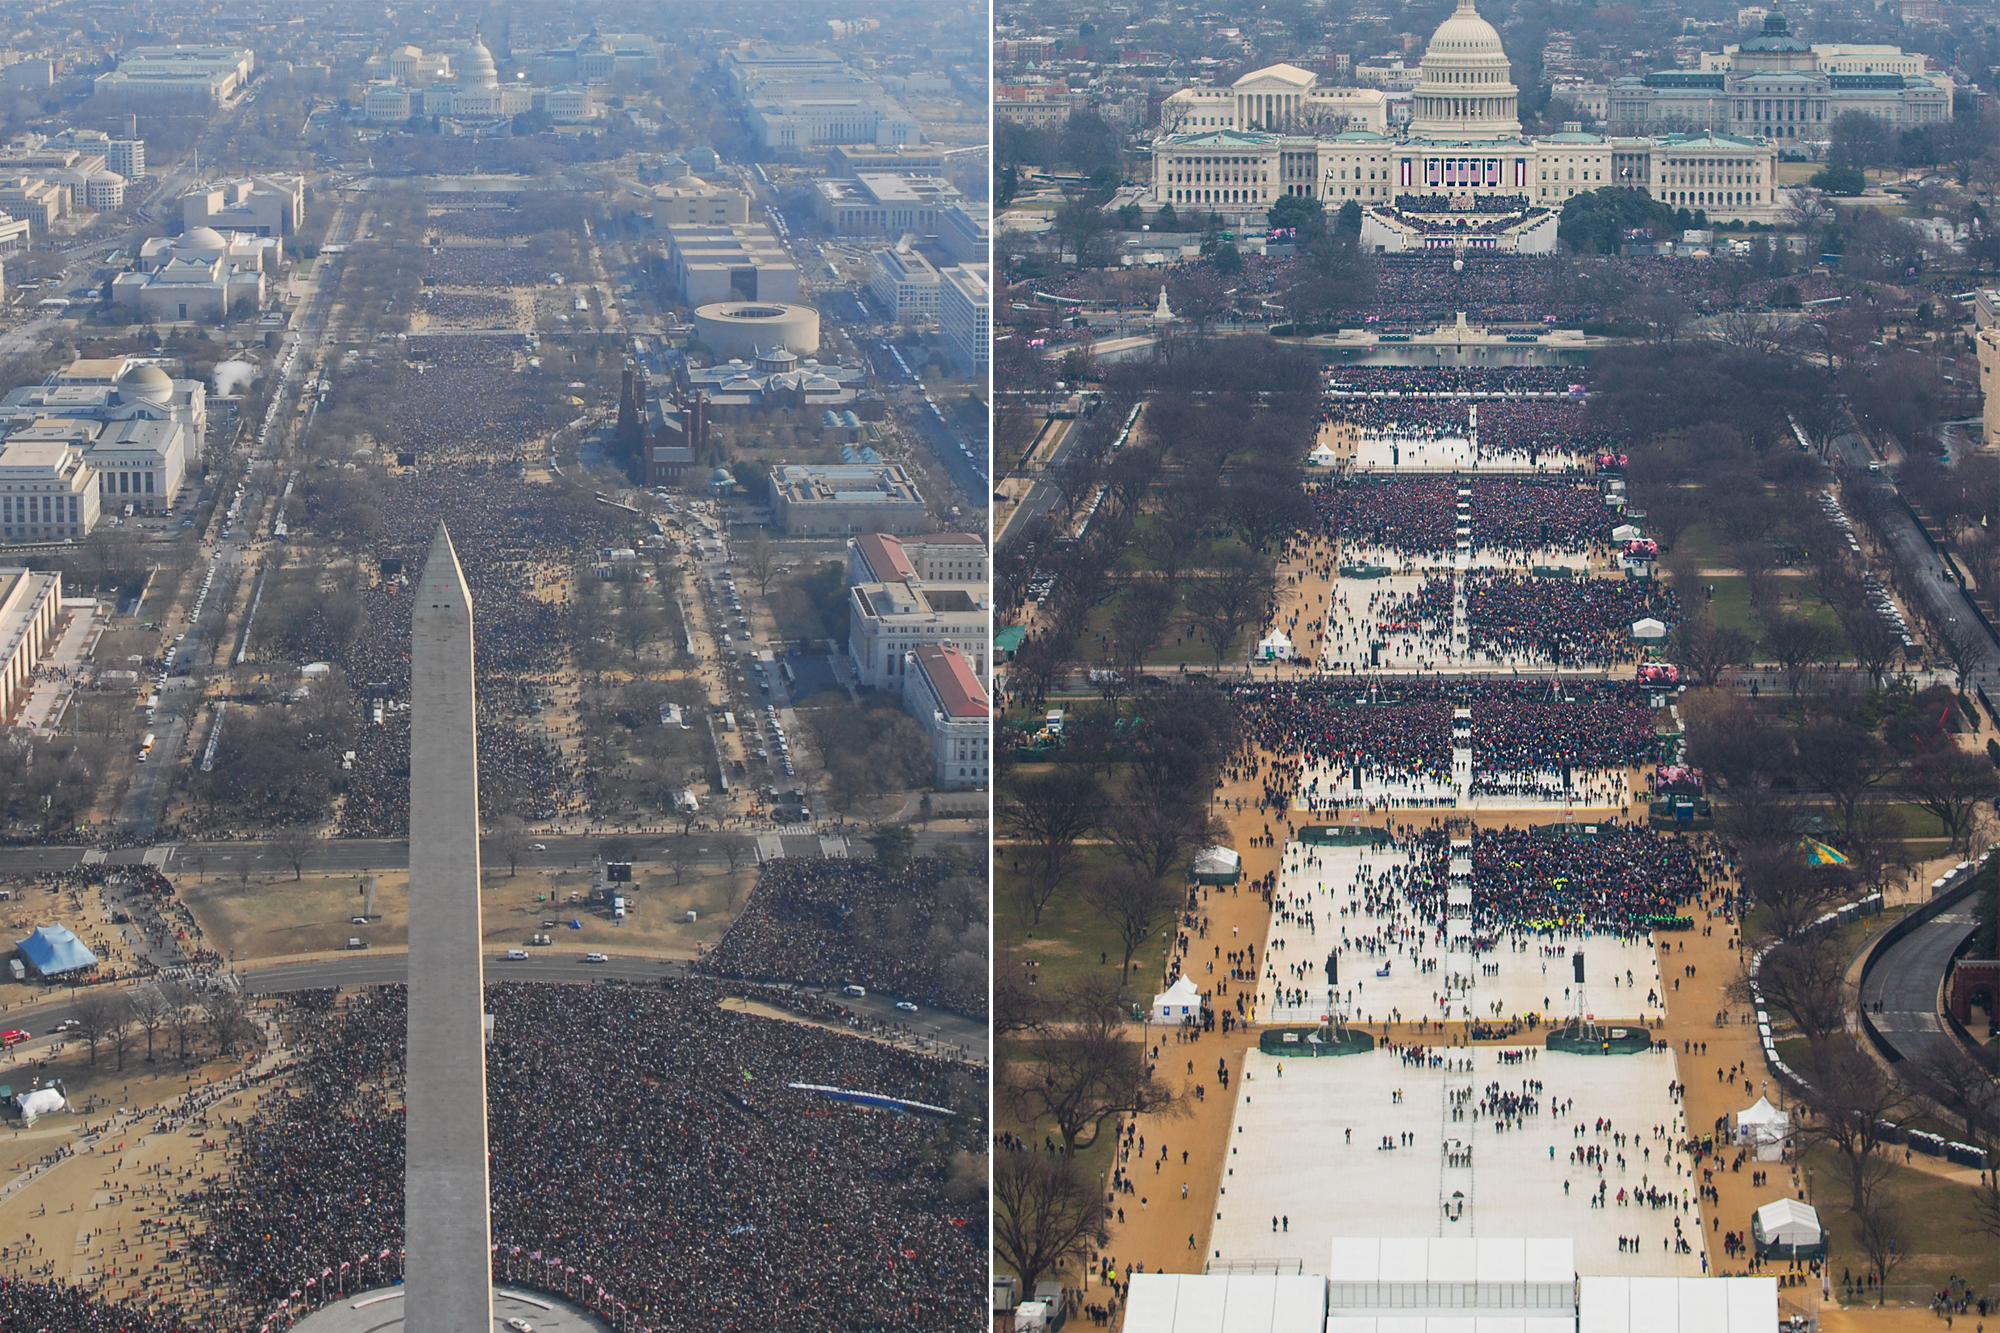 Left: An aerial view of President Barack Obama's inauguration on Jan. 20, 2009 in Washington, D.C. Right: An aerial view of President Donald Trump’s inauguration on Jan. 20, 2017 in Washington, D.C. (National Park Service)